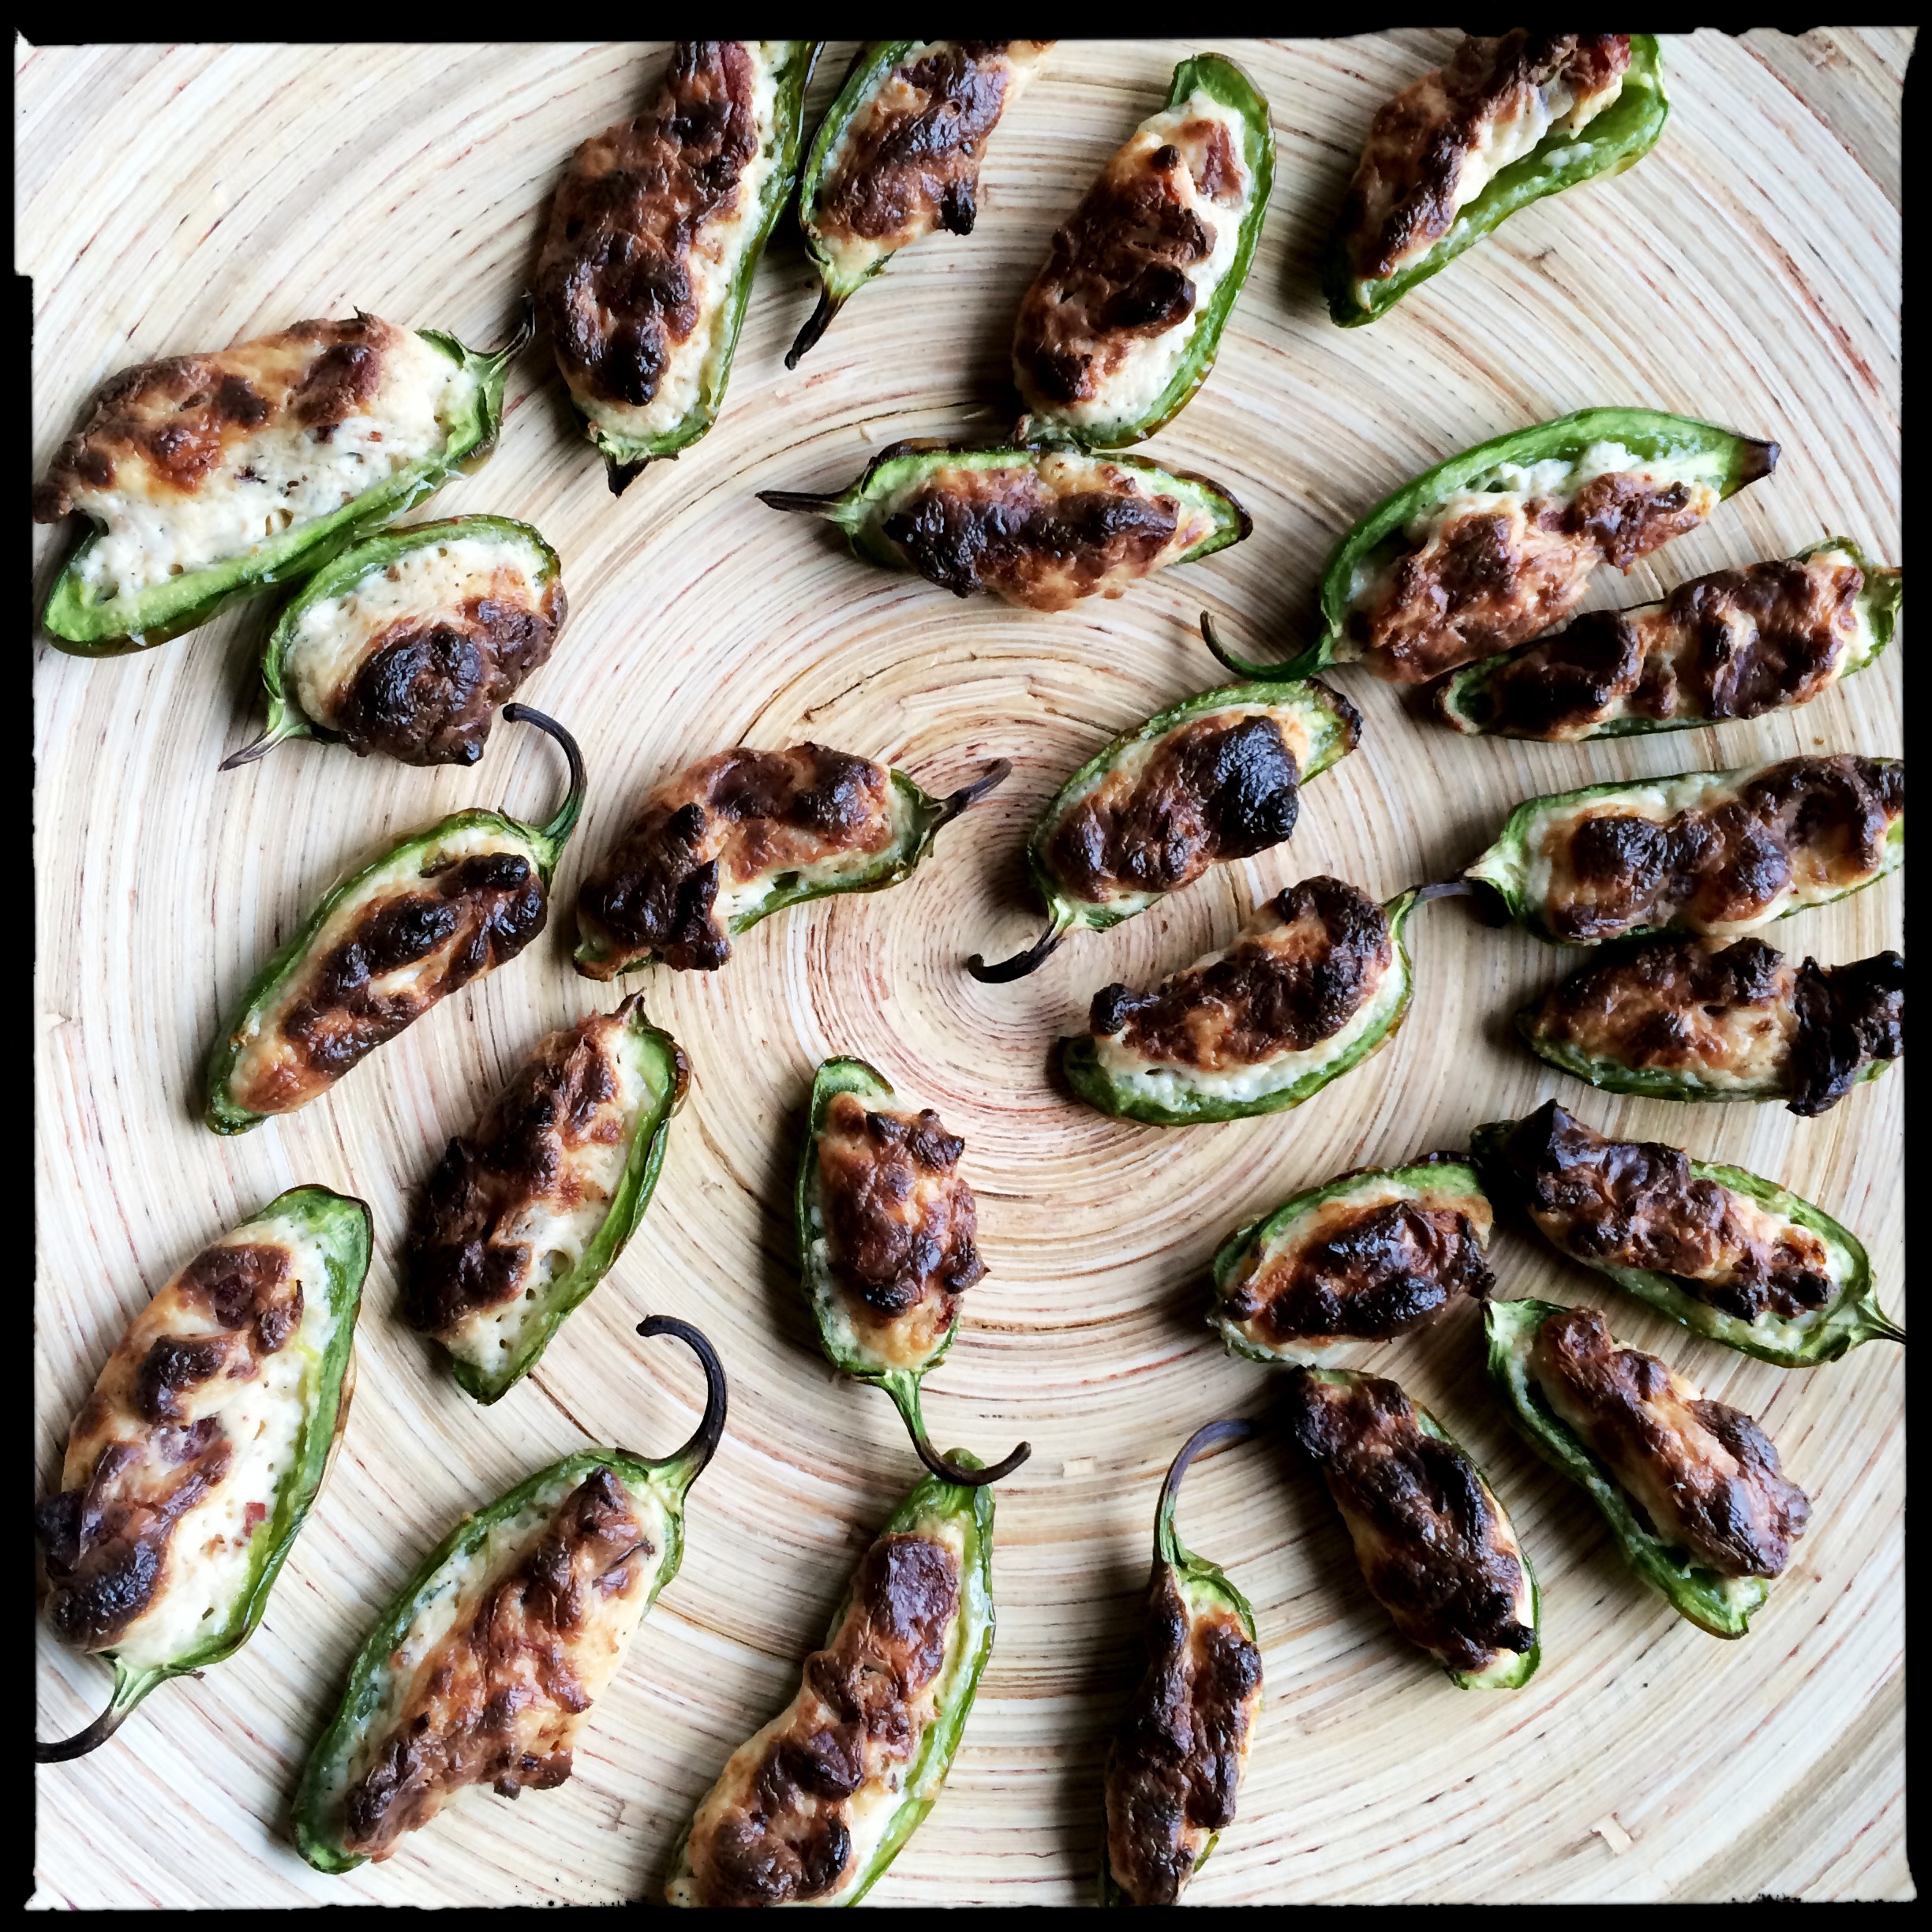 Cream cheese and bacon stuffed jalapeños for last night's summer feast with neighbors.